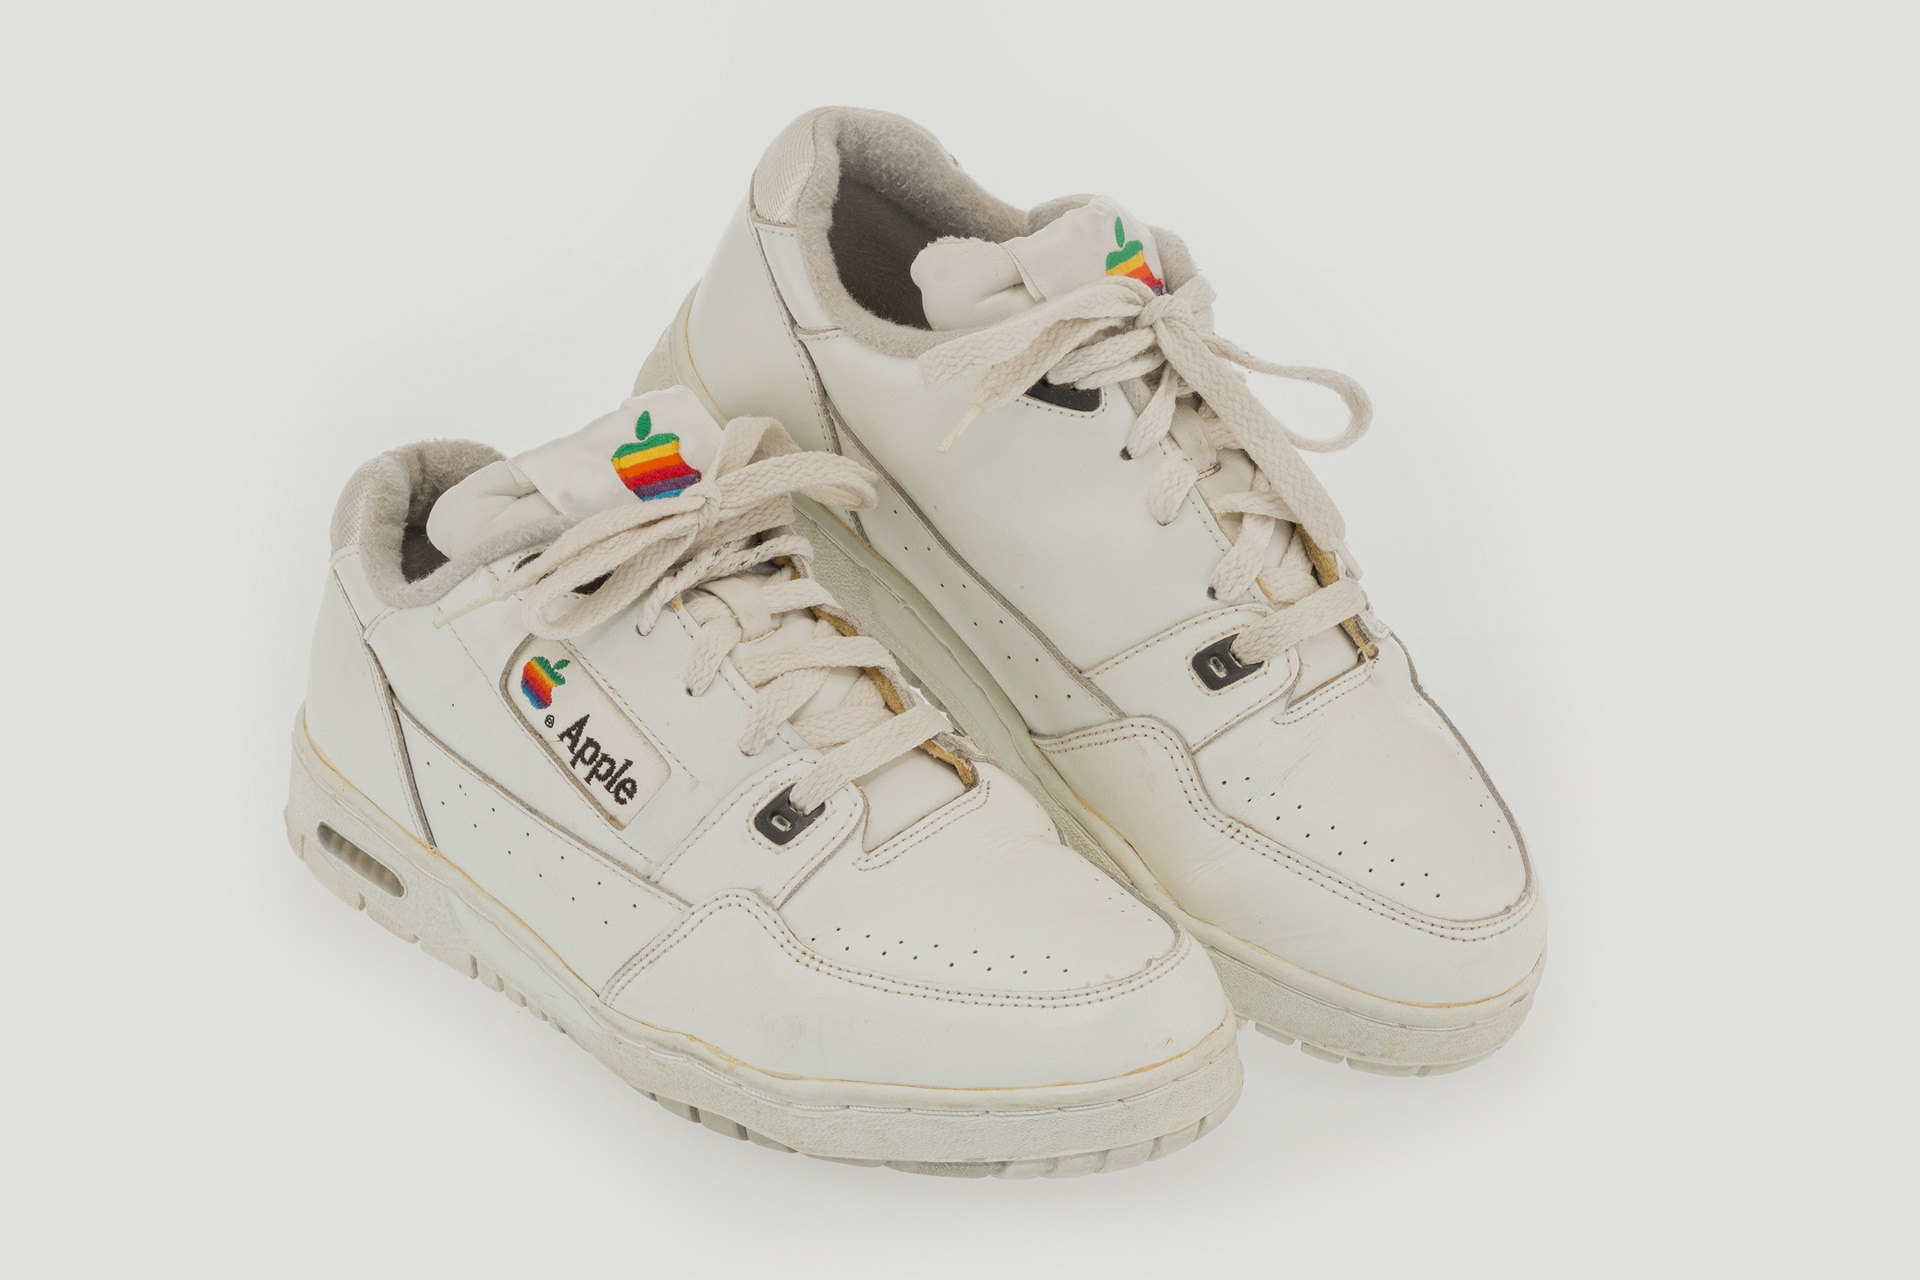 Apple and Reebok: A Match Made in Sneaker Heaven